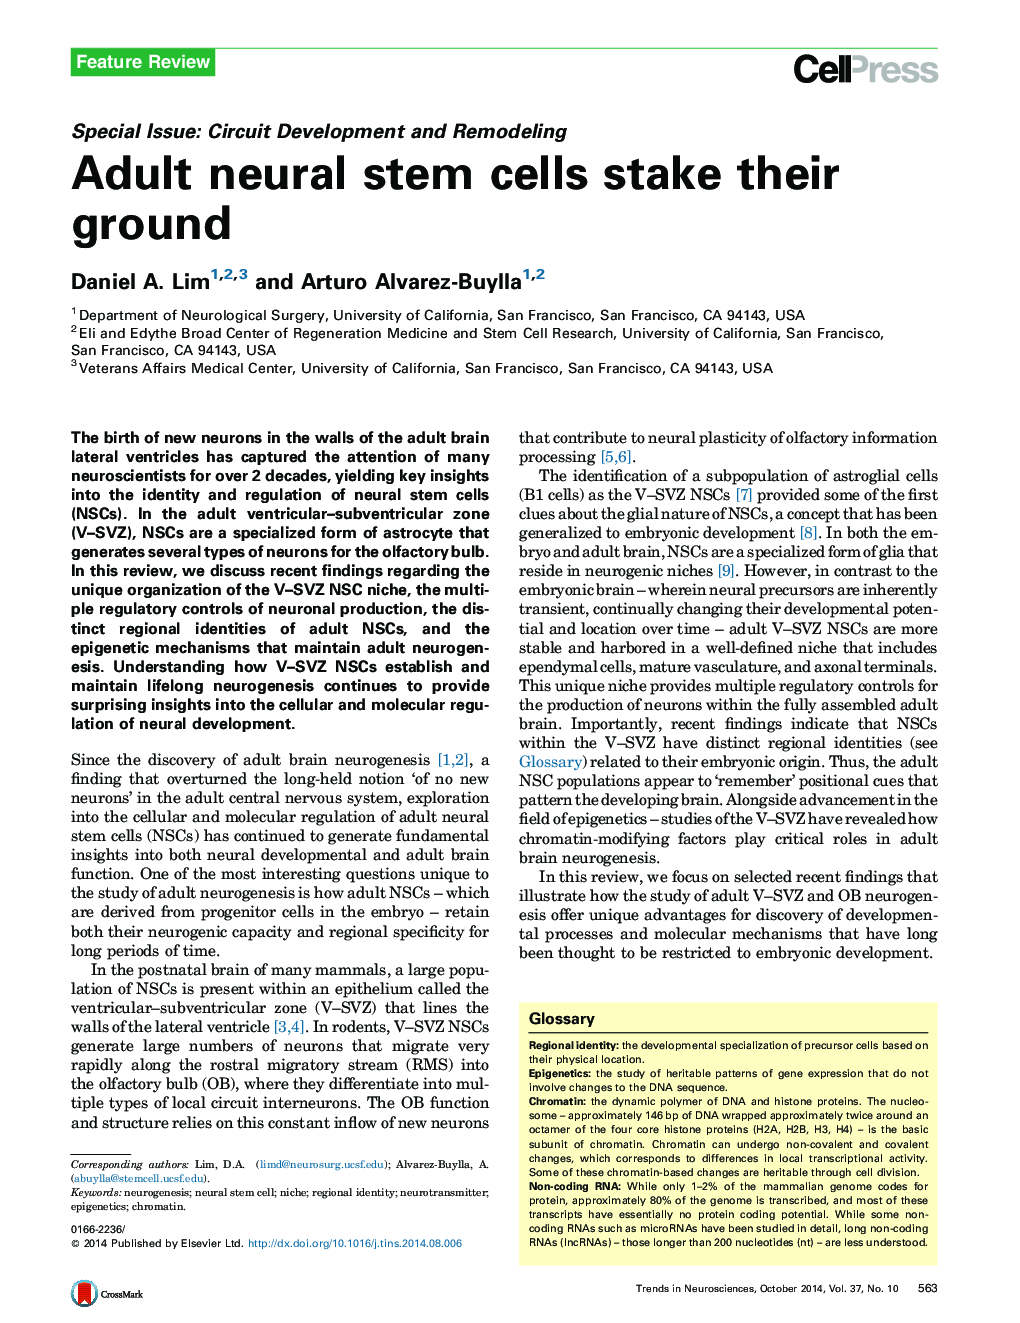 Adult neural stem cells stake their ground